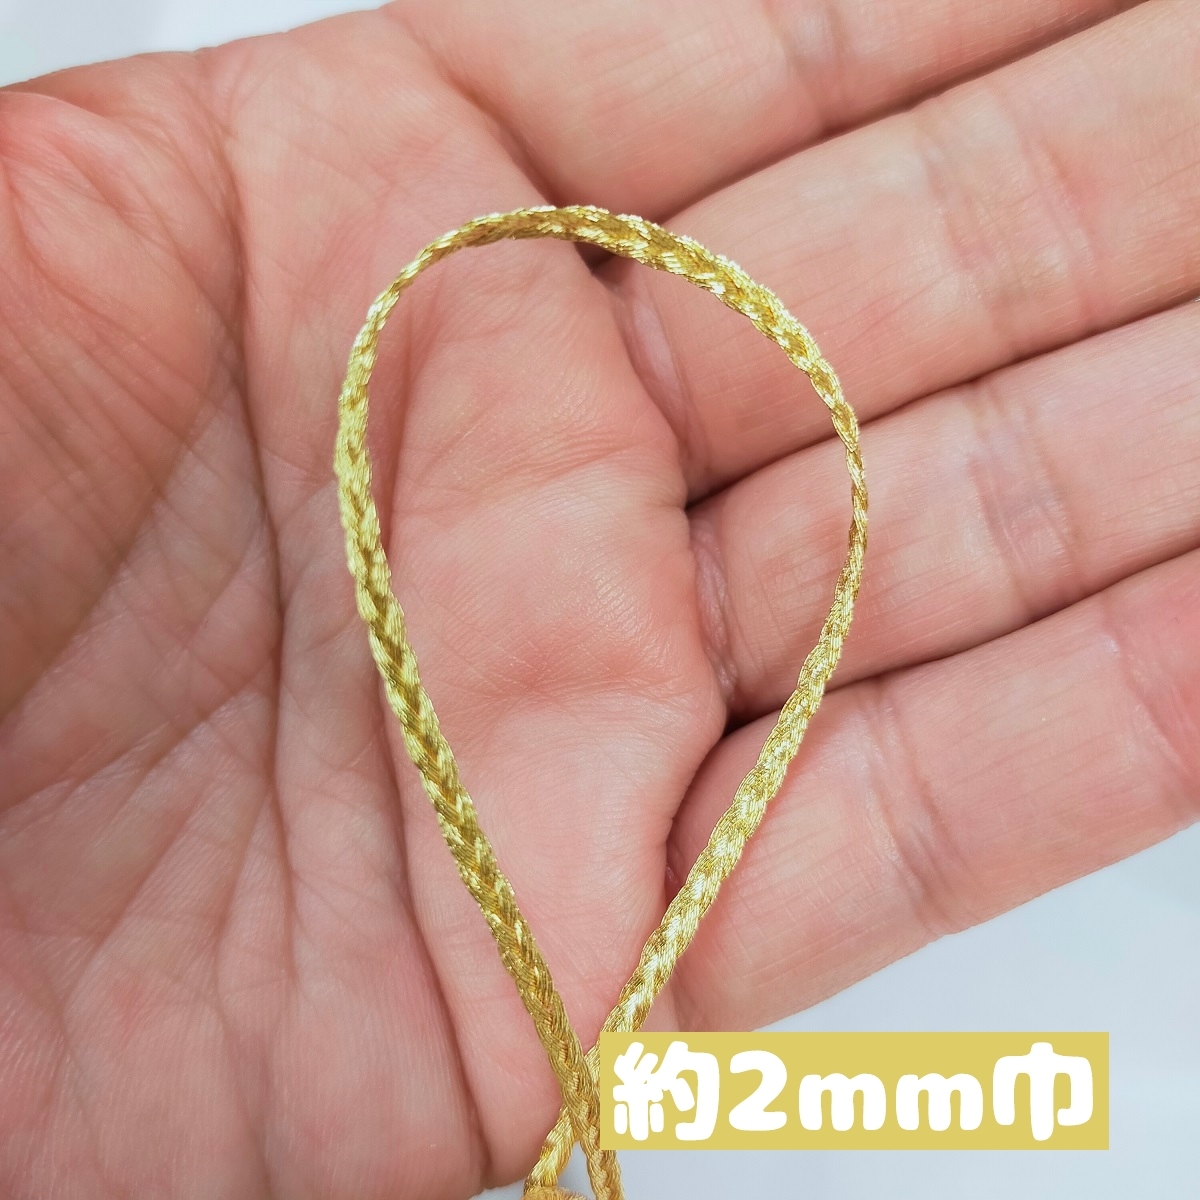  lame three tsu braided tape gold lame code thickness approximately 2mm gold Gold cord string himo handicrafts supplies hand made 20m 0390